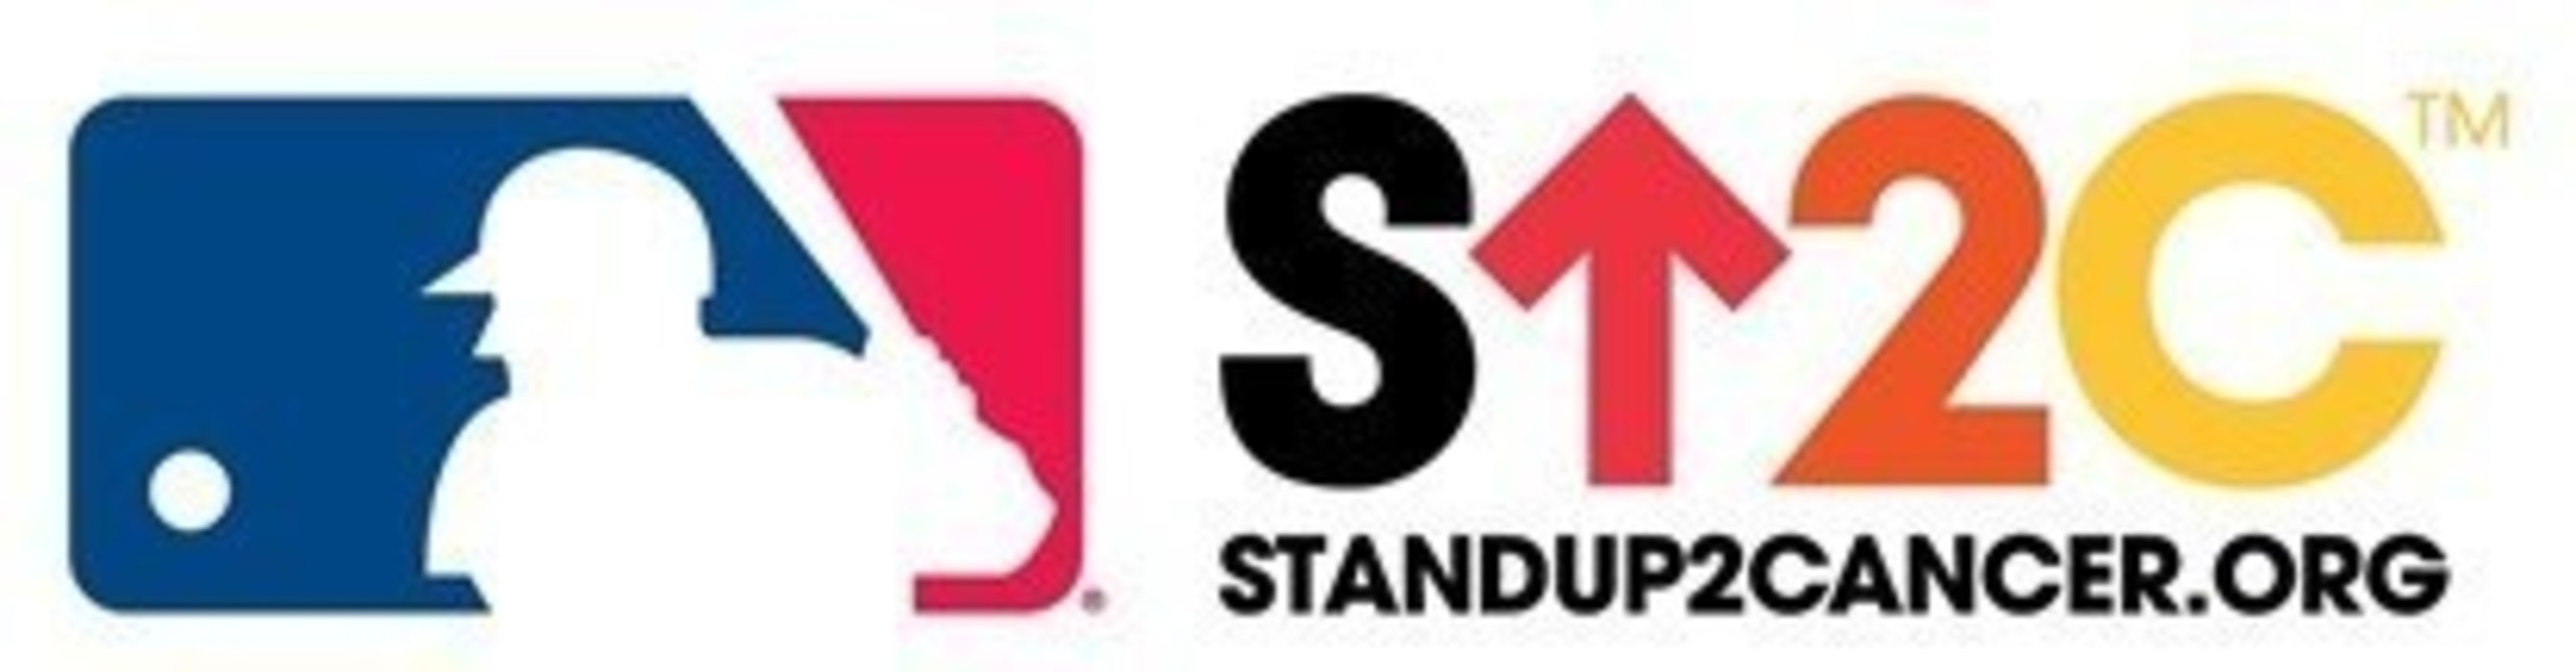 Major League Baseball (MLB) and Stand Up To Cancer (SU2C) Debuts New PSA During Game Three of the World Series